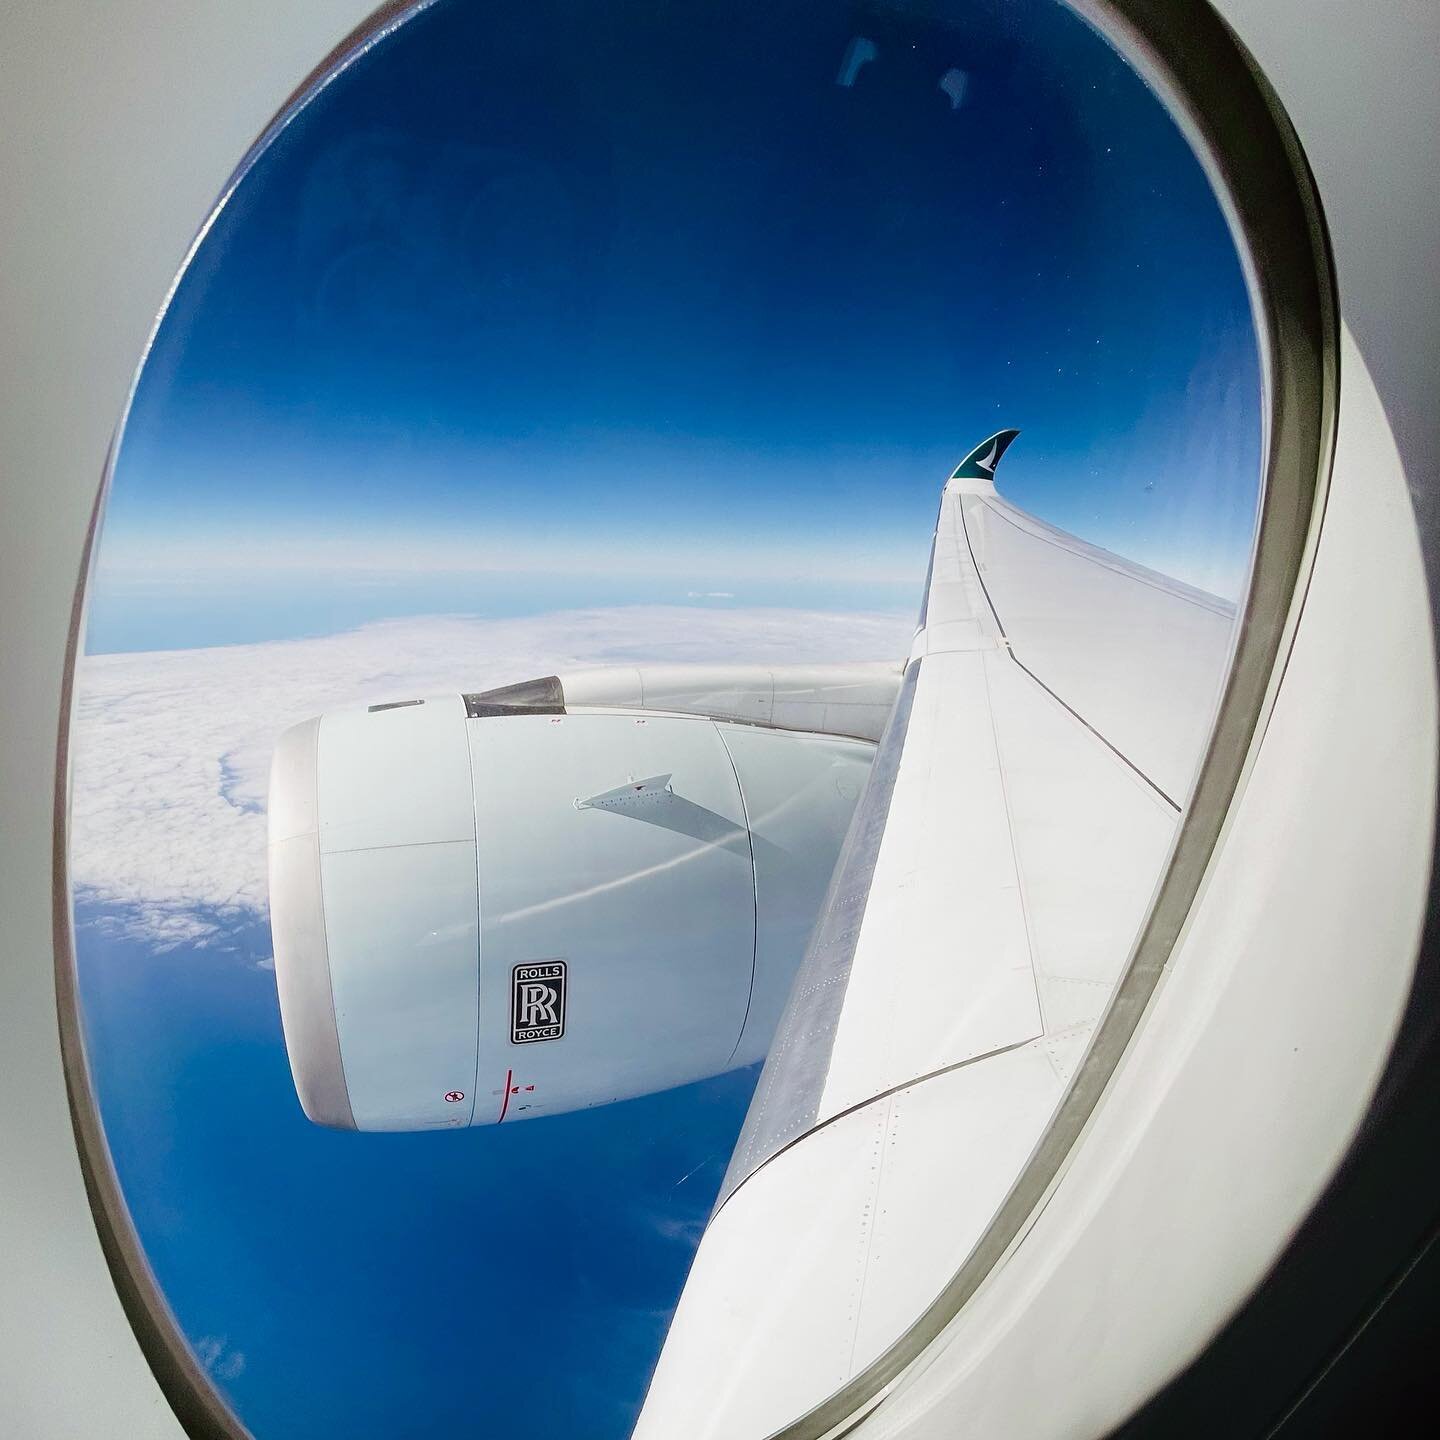 Remember this view? #travel #airliner #a350